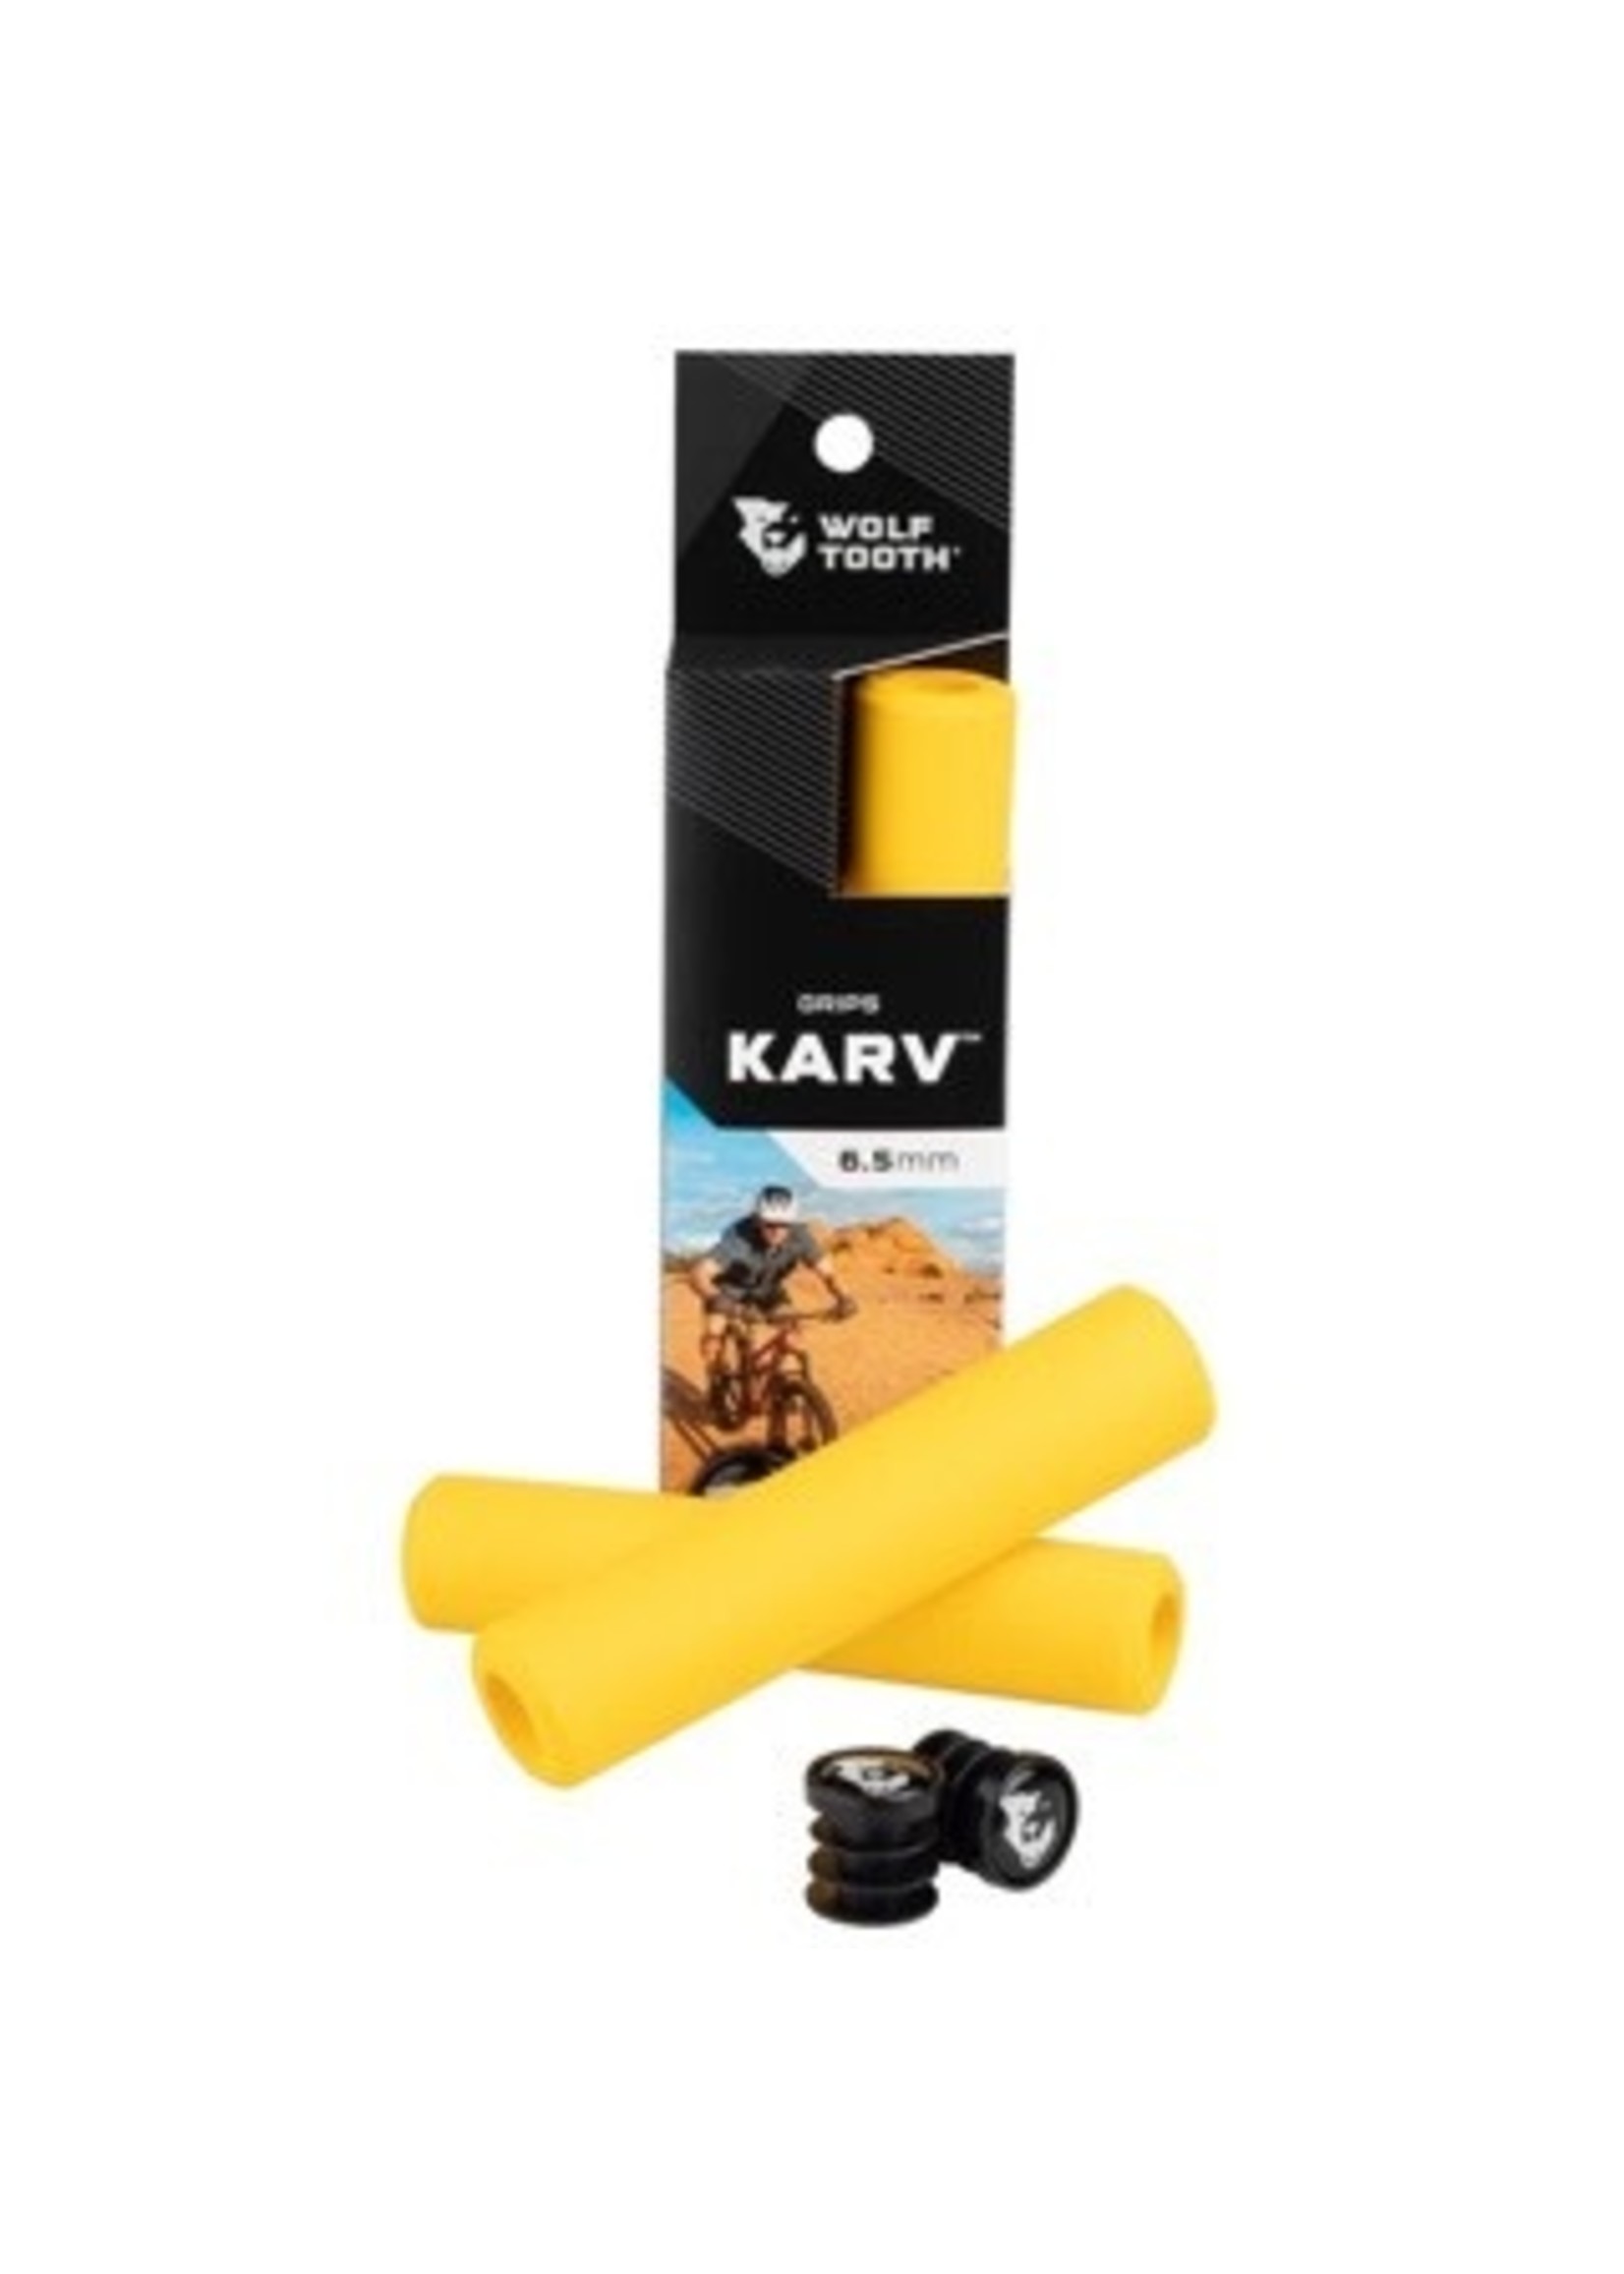 Wolf Tooth Components Wolf Tooth Karv Grips